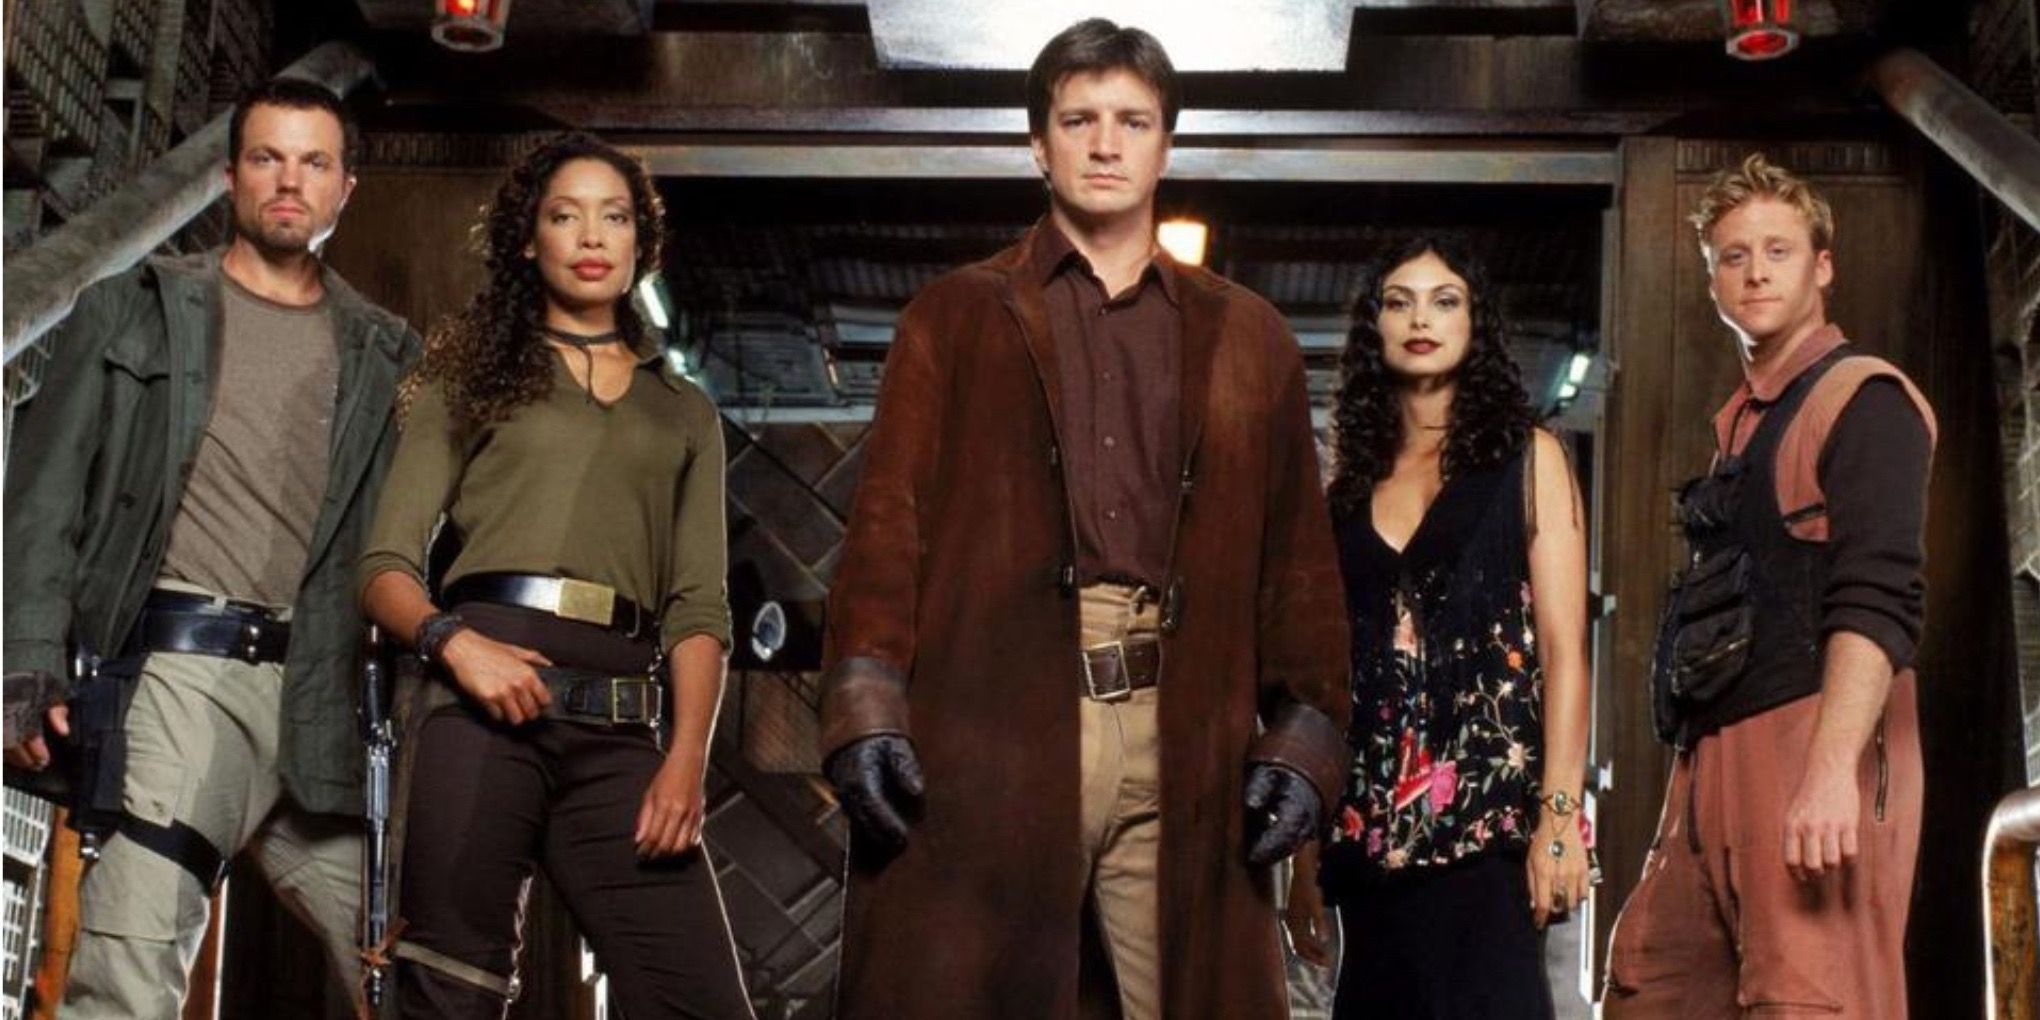 Firefly cast posing on a spaceship